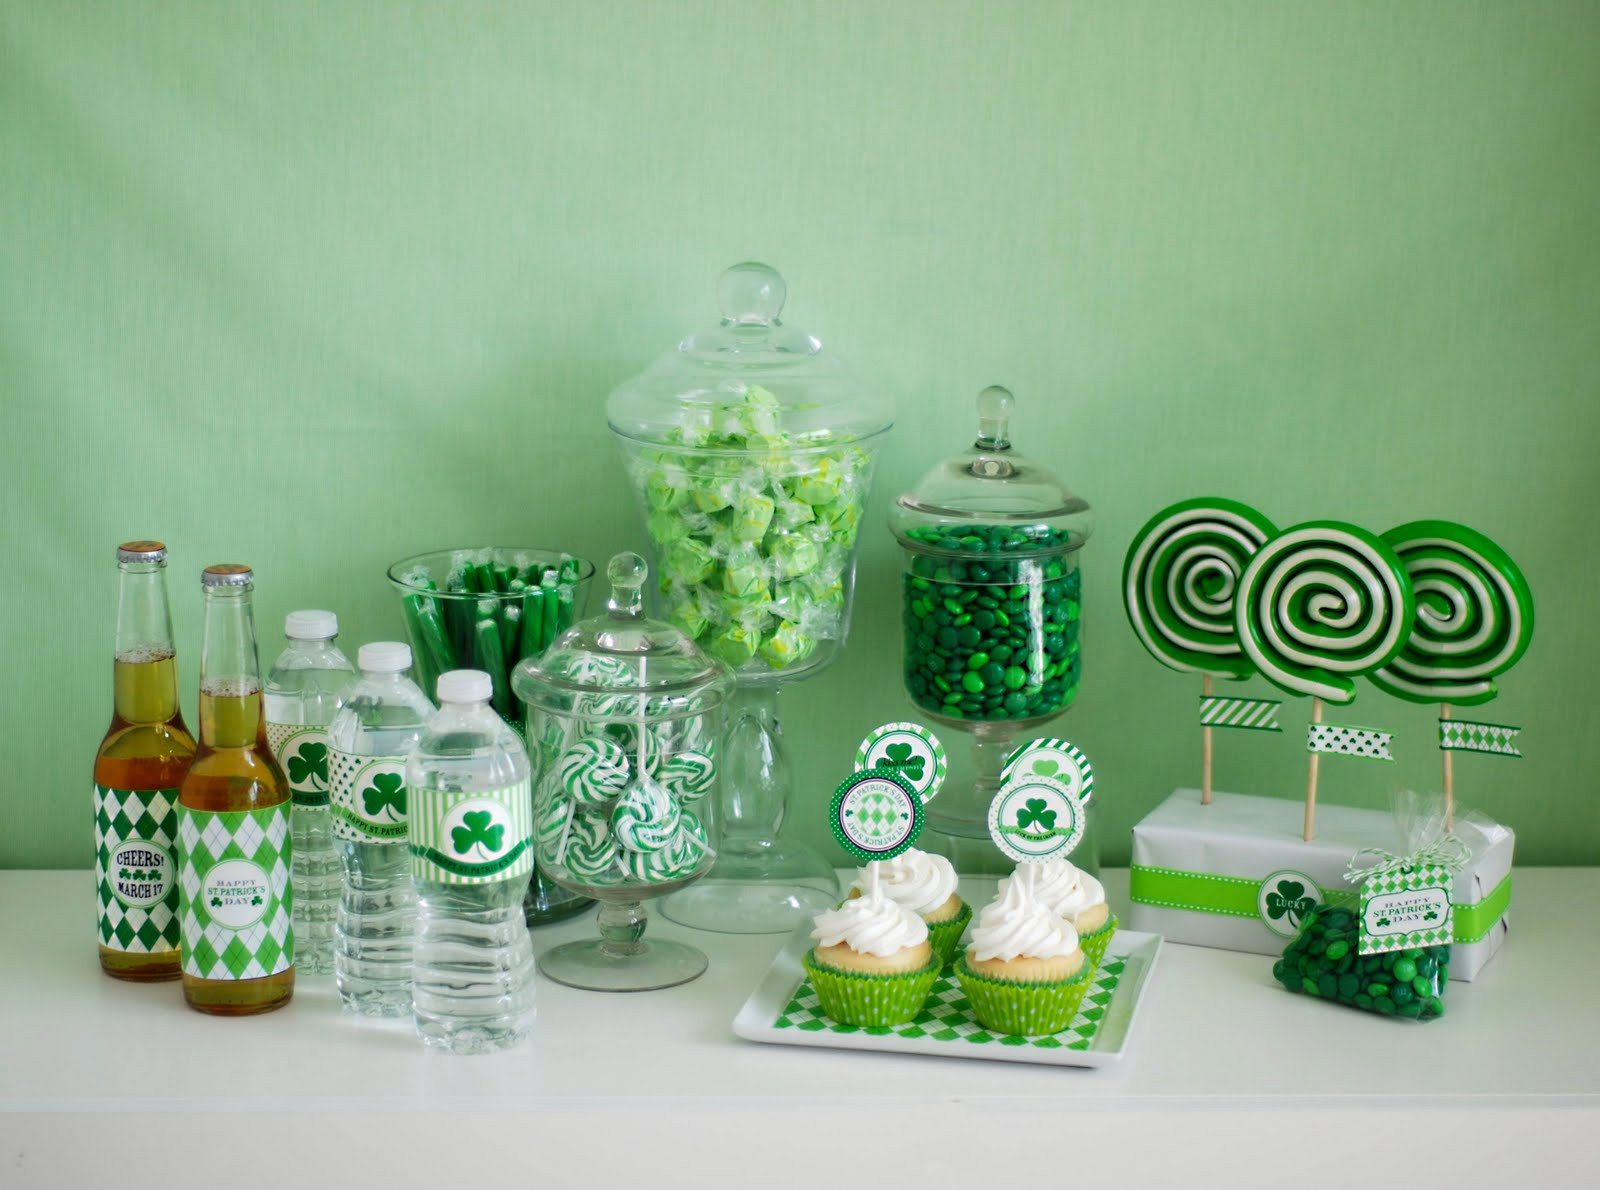 St Patrick Day Party Ideas
 "LUCKY St Patrick s Day" Printable Design Collection